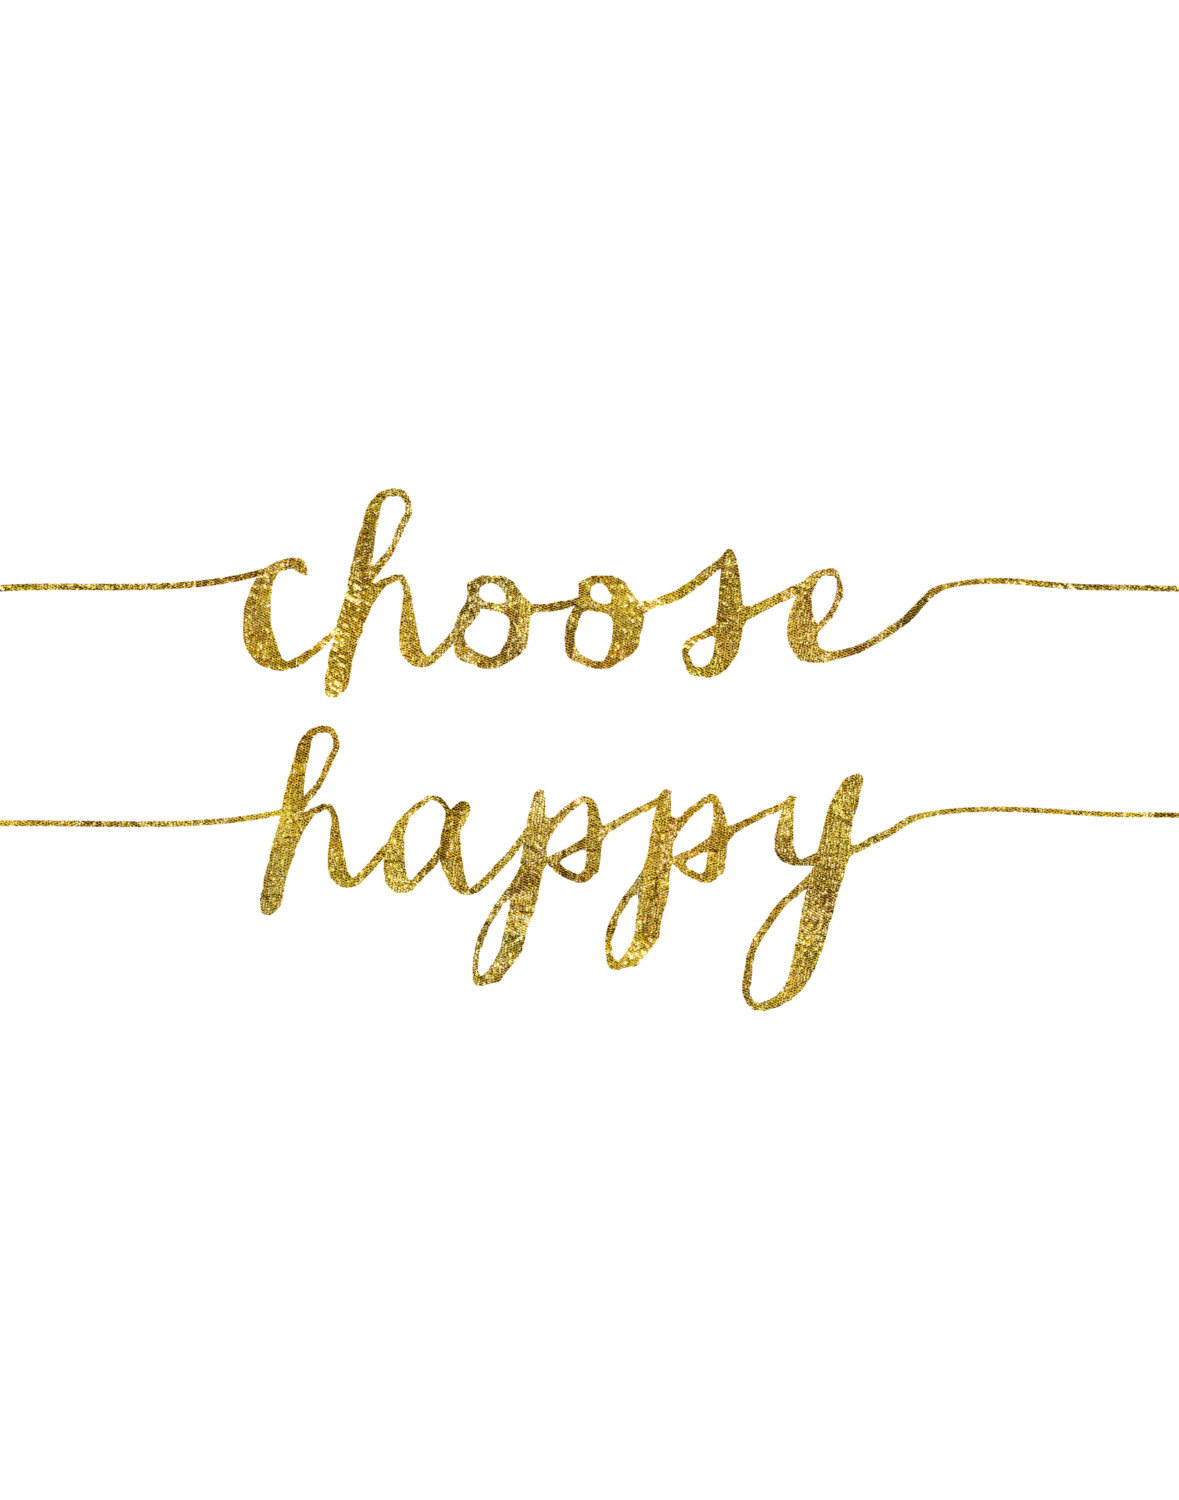 this is something my papa dave always said to us growing up, you choose to be happy or you choose to be sad + miserable — and i choose happy. [source]